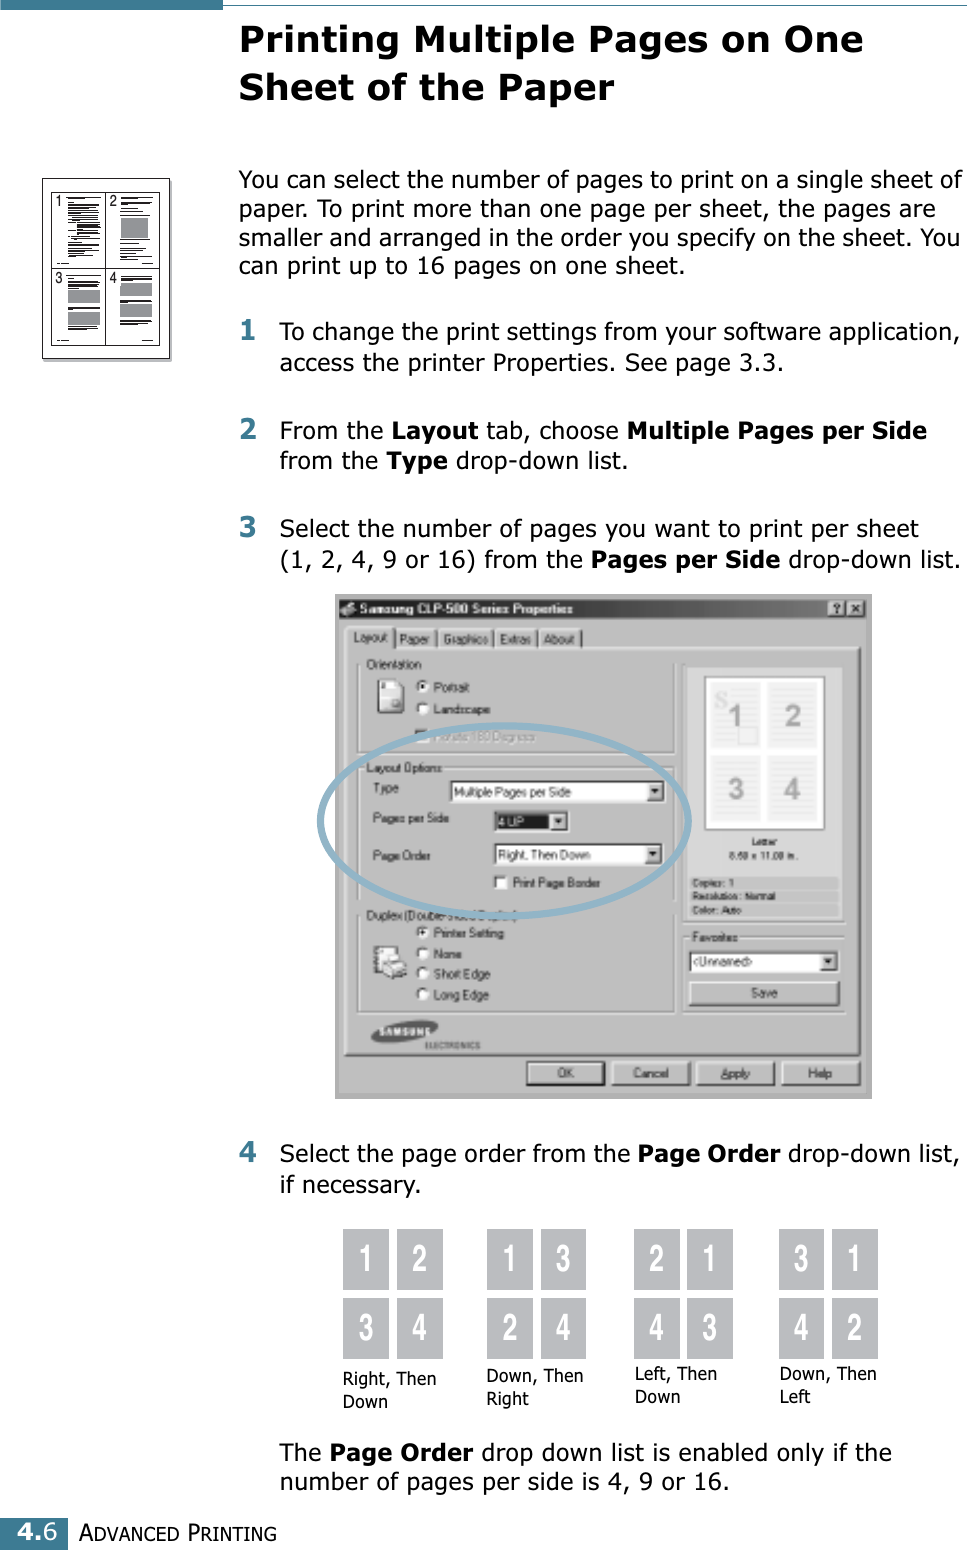 ADVANCED PRINTING4.6Printing Multiple Pages on One Sheet of the PaperYou can select the number of pages to print on a single sheet of paper. To print more than one page per sheet, the pages are smaller and arranged in the order you specify on the sheet. You can print up to 16 pages on one sheet.1To change the print settings from your software application, access the printer Properties. See page 3.3.2From the Layout tab, choose Multiple Pages per Side from the Type drop-down list. 3Select the number of pages you want to print per sheet (1, 2, 4, 9 or 16) from the Pages per Side drop-down list.4Select the page order from the Page Order drop-down list, if necessary. The Page Order drop down list is enabled only if the number of pages per side is 4, 9 or 16.1 23 4Right, Then Down1324123424133412Down, Then RightLeft, Then DownDown, Then Left